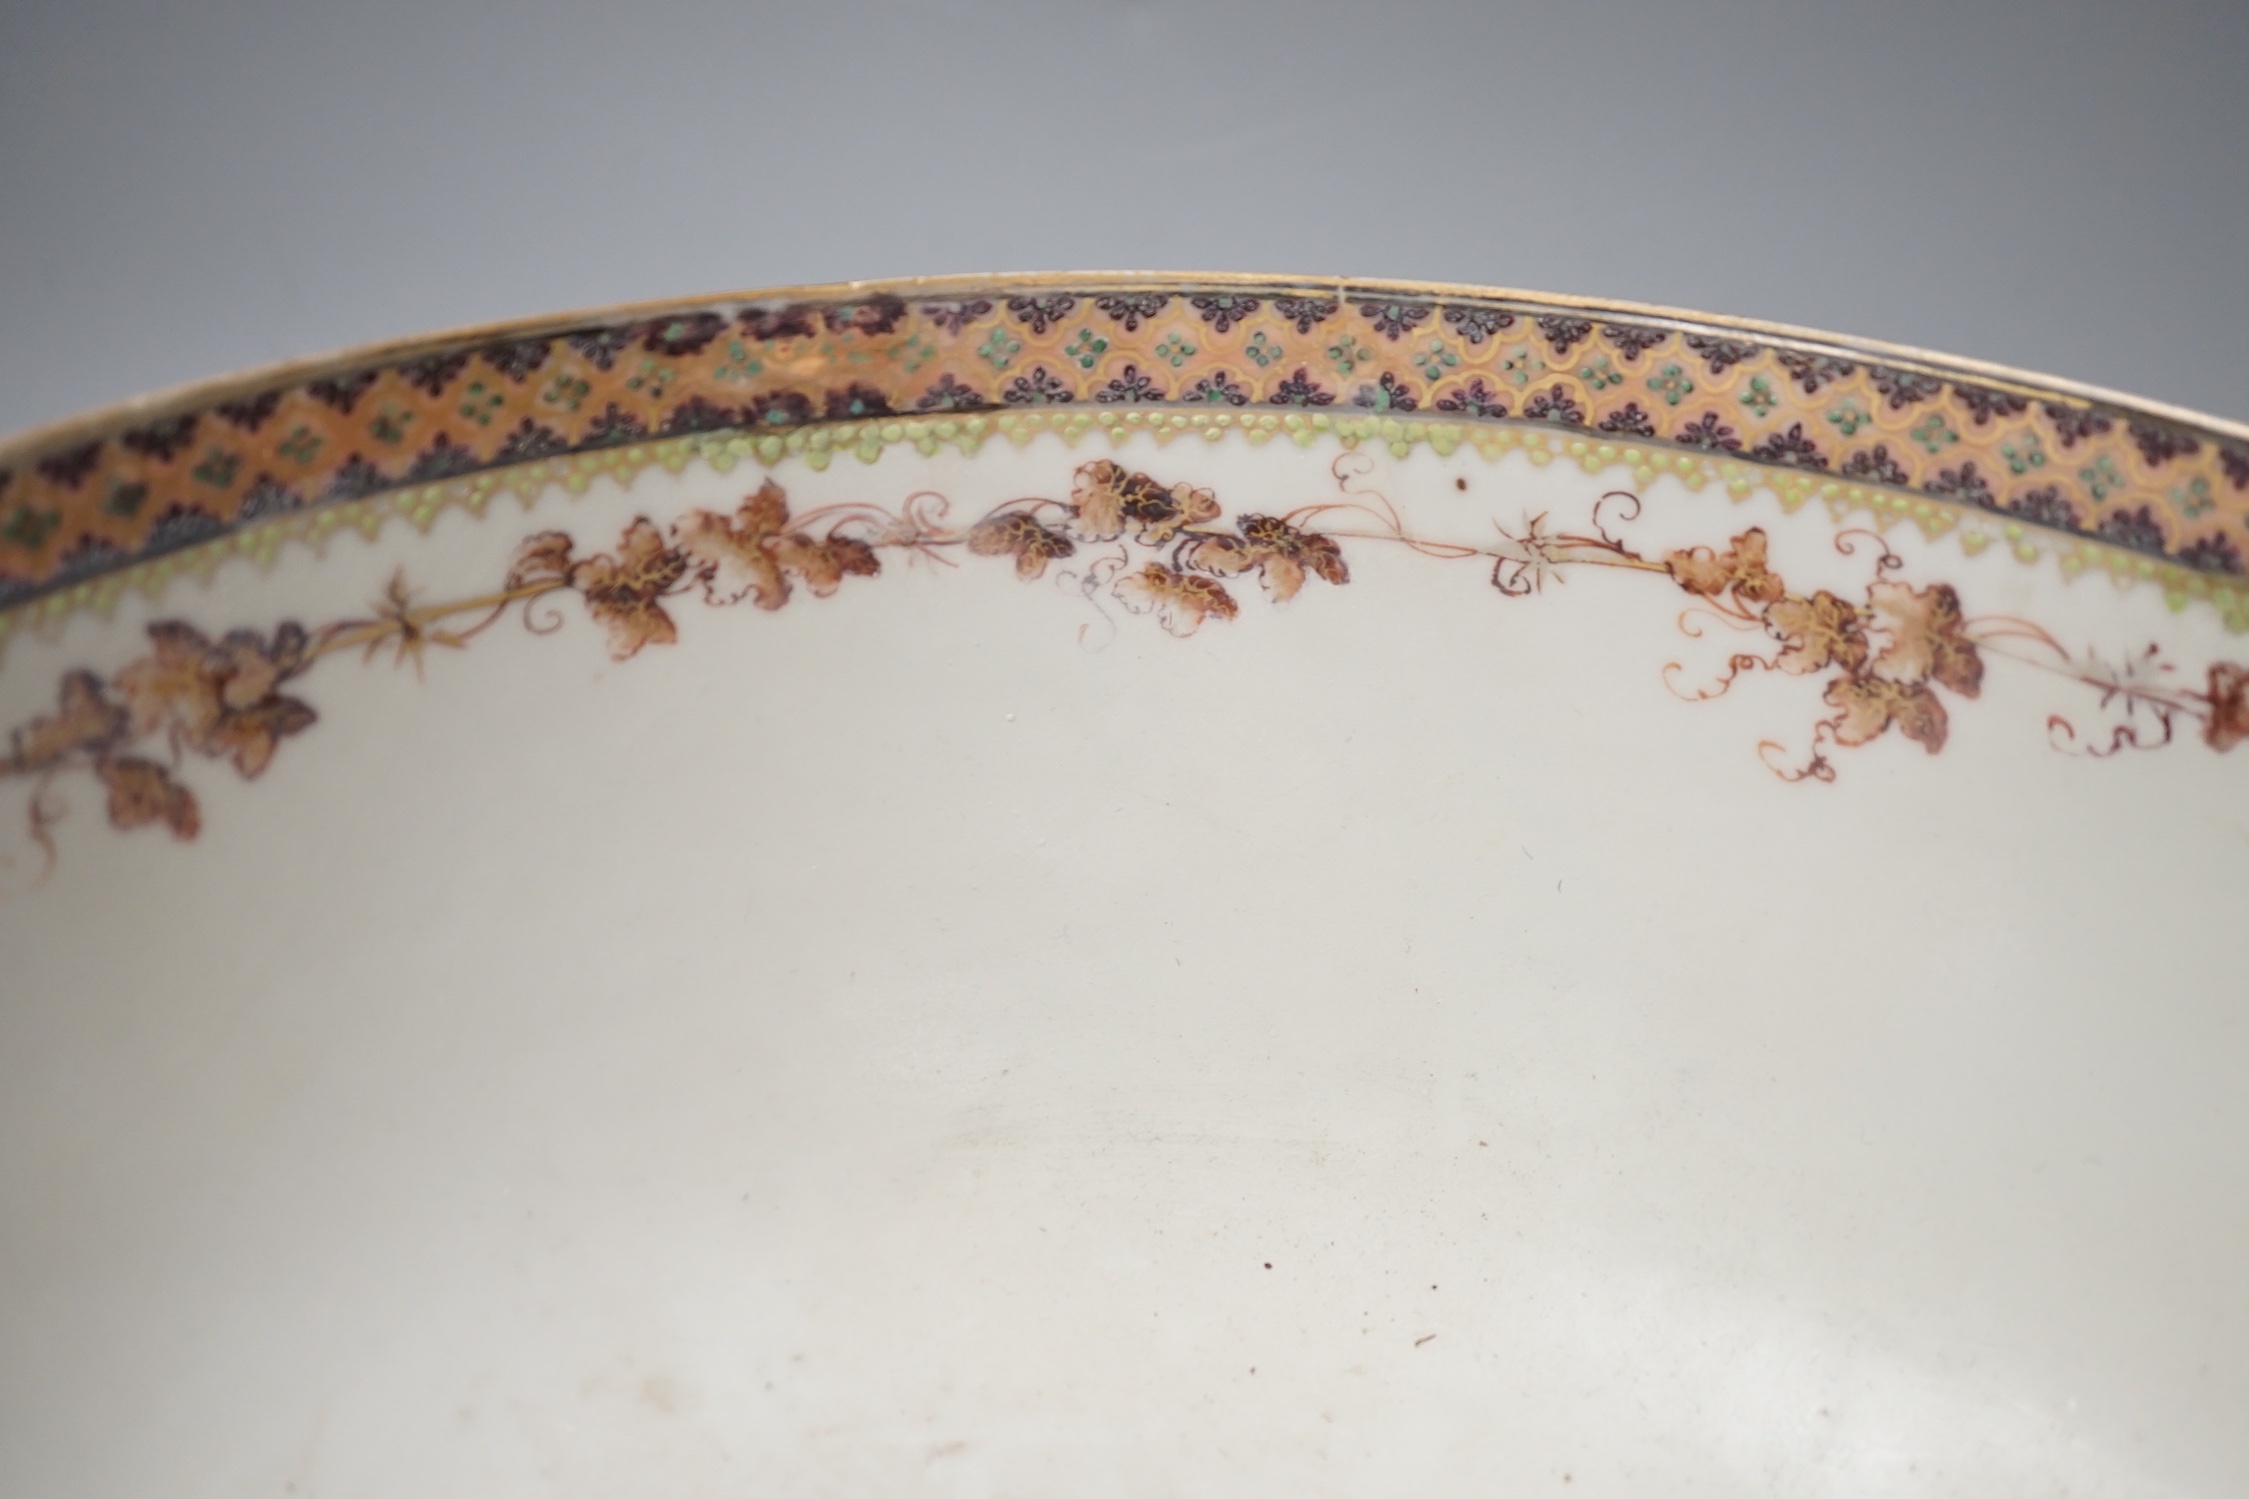 A Jun type dish, 13.5cm and an 18th century Chinese famille rose punch bowl, 29cm